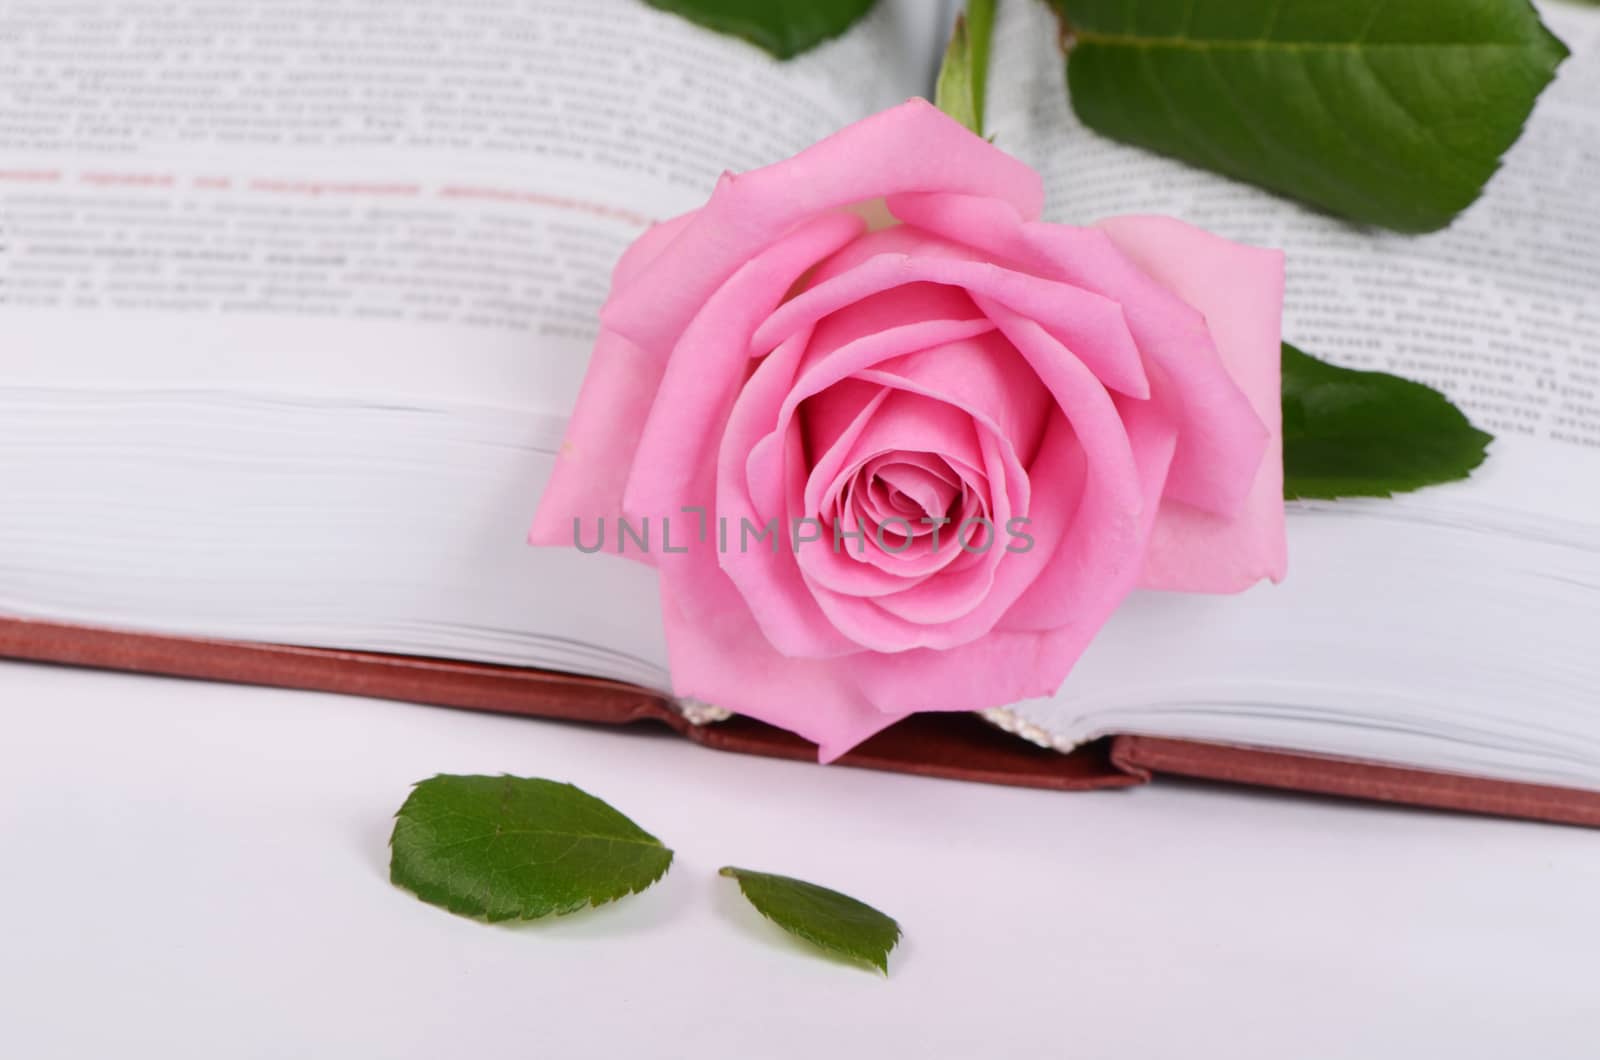 The rose on the book closeup